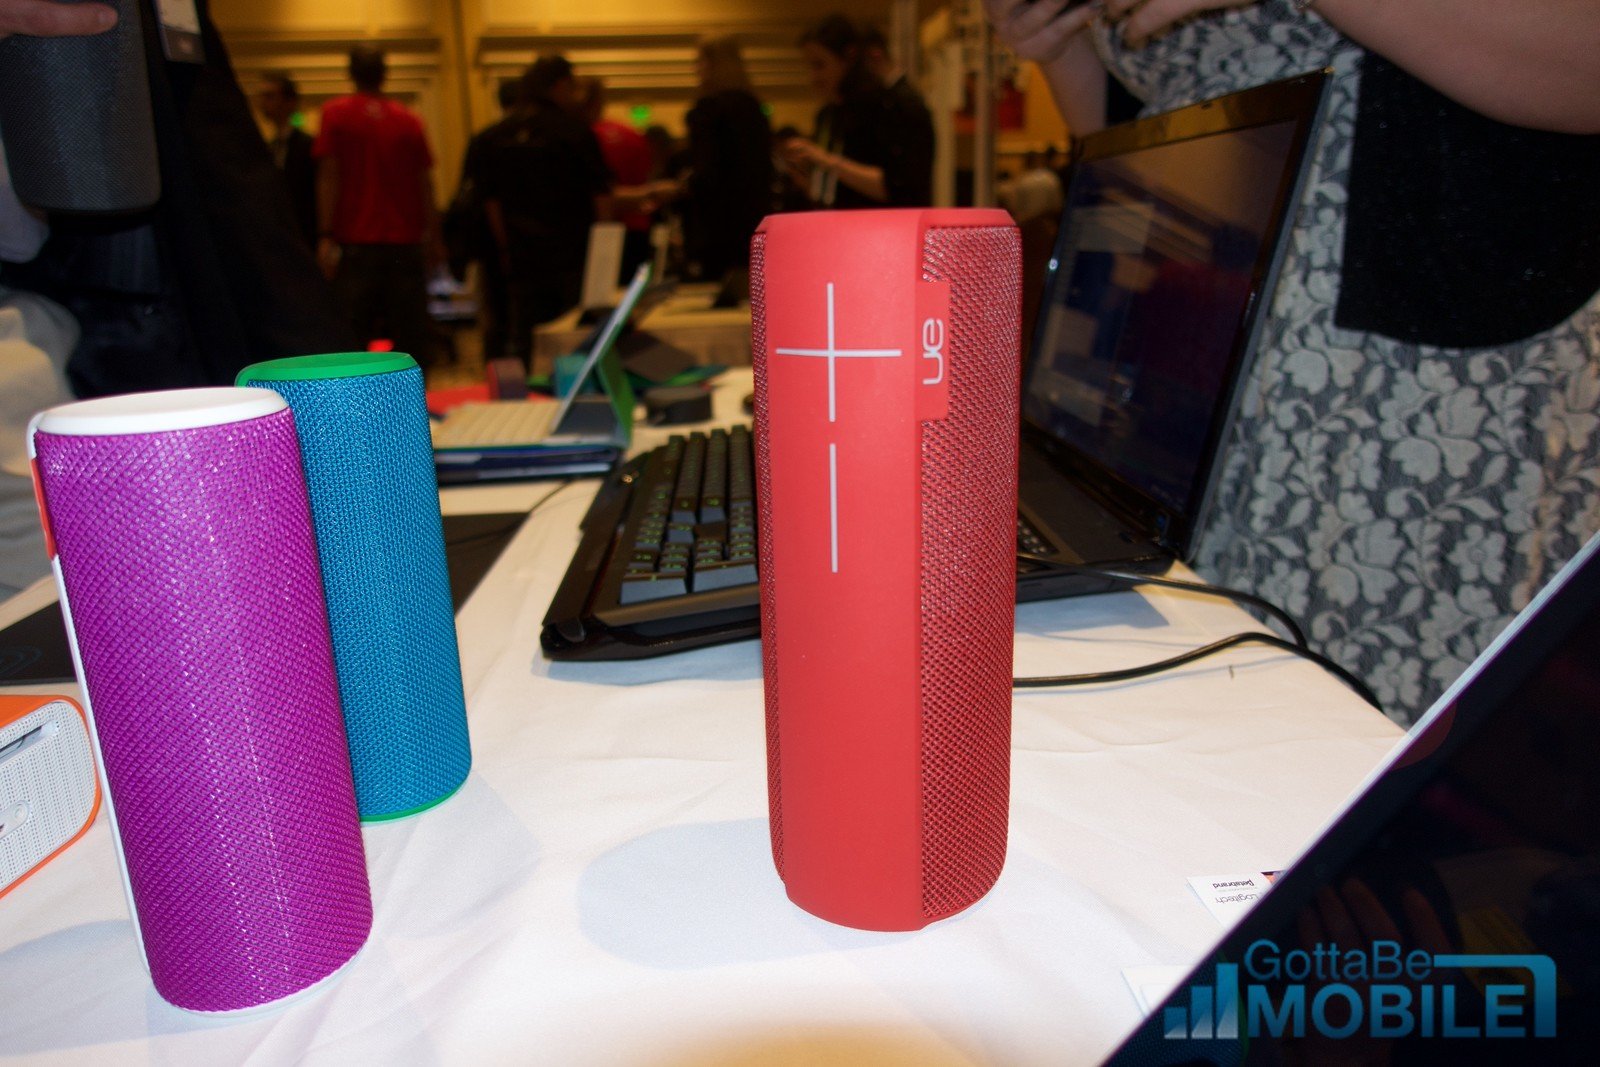 The Logitech UE MEGABOOM is waterproof with 20 hours of battery life.